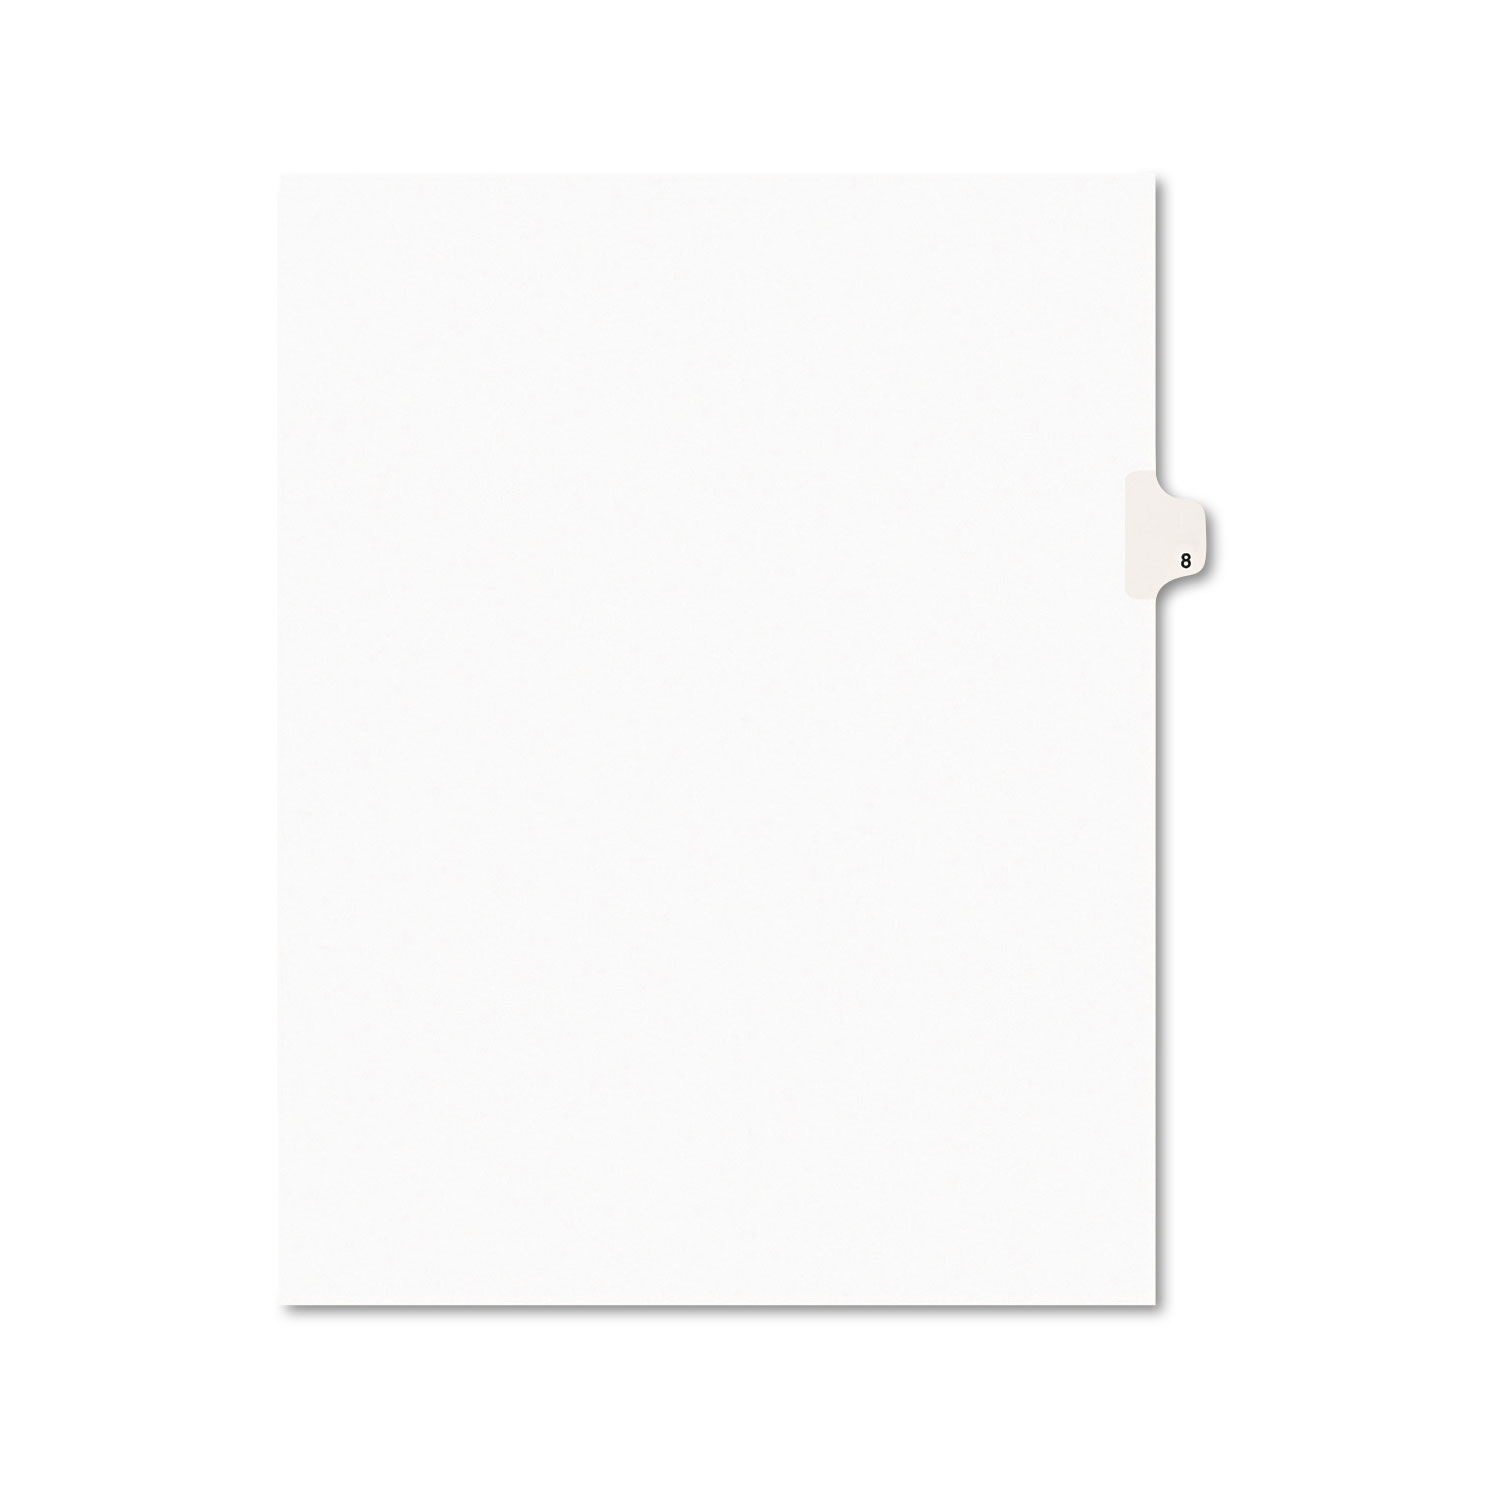  Avery 11918 Preprinted Legal Exhibit Side Tab Index Dividers, Avery Style, 10-Tab, 8, 11 x 8.5, White, 25/Pack (AVE11918) 